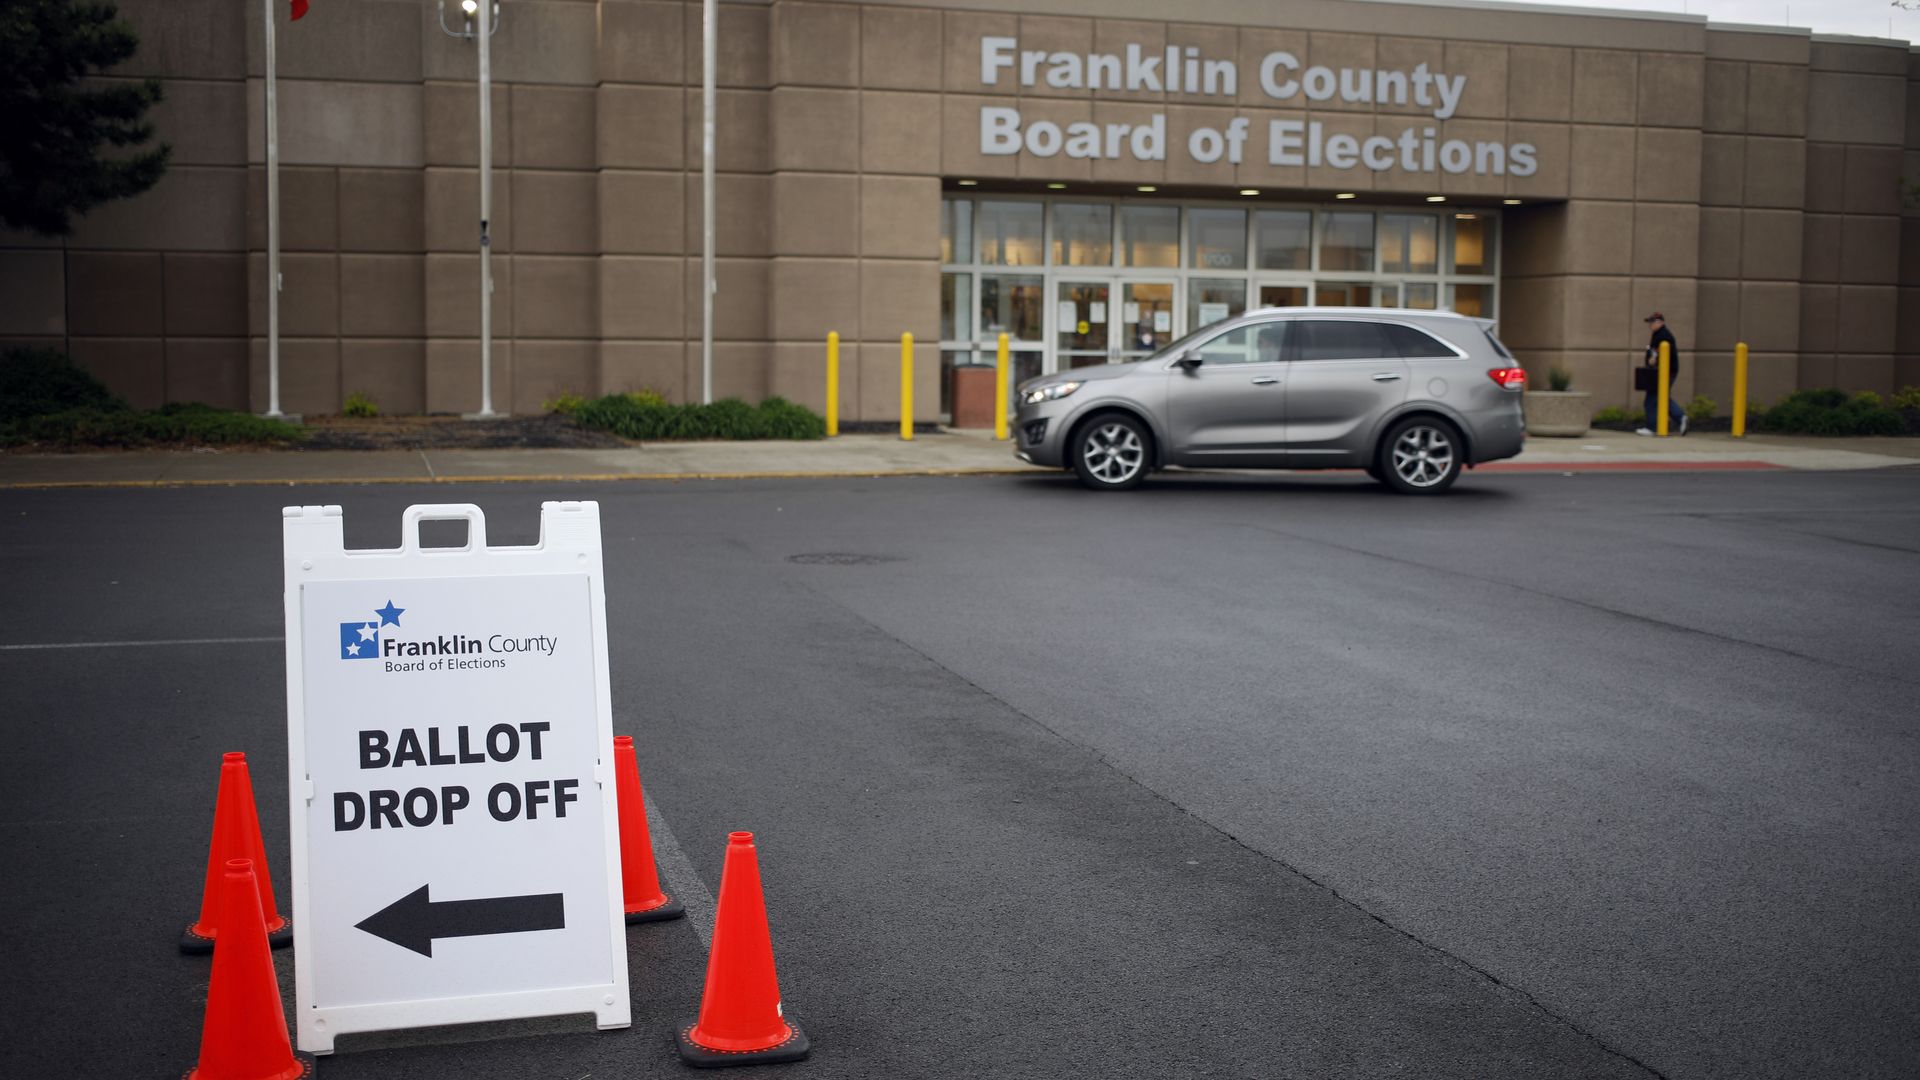 The front entrance of the Franklin County Board of Elections with a side in front reading "Ballot Drop Off."